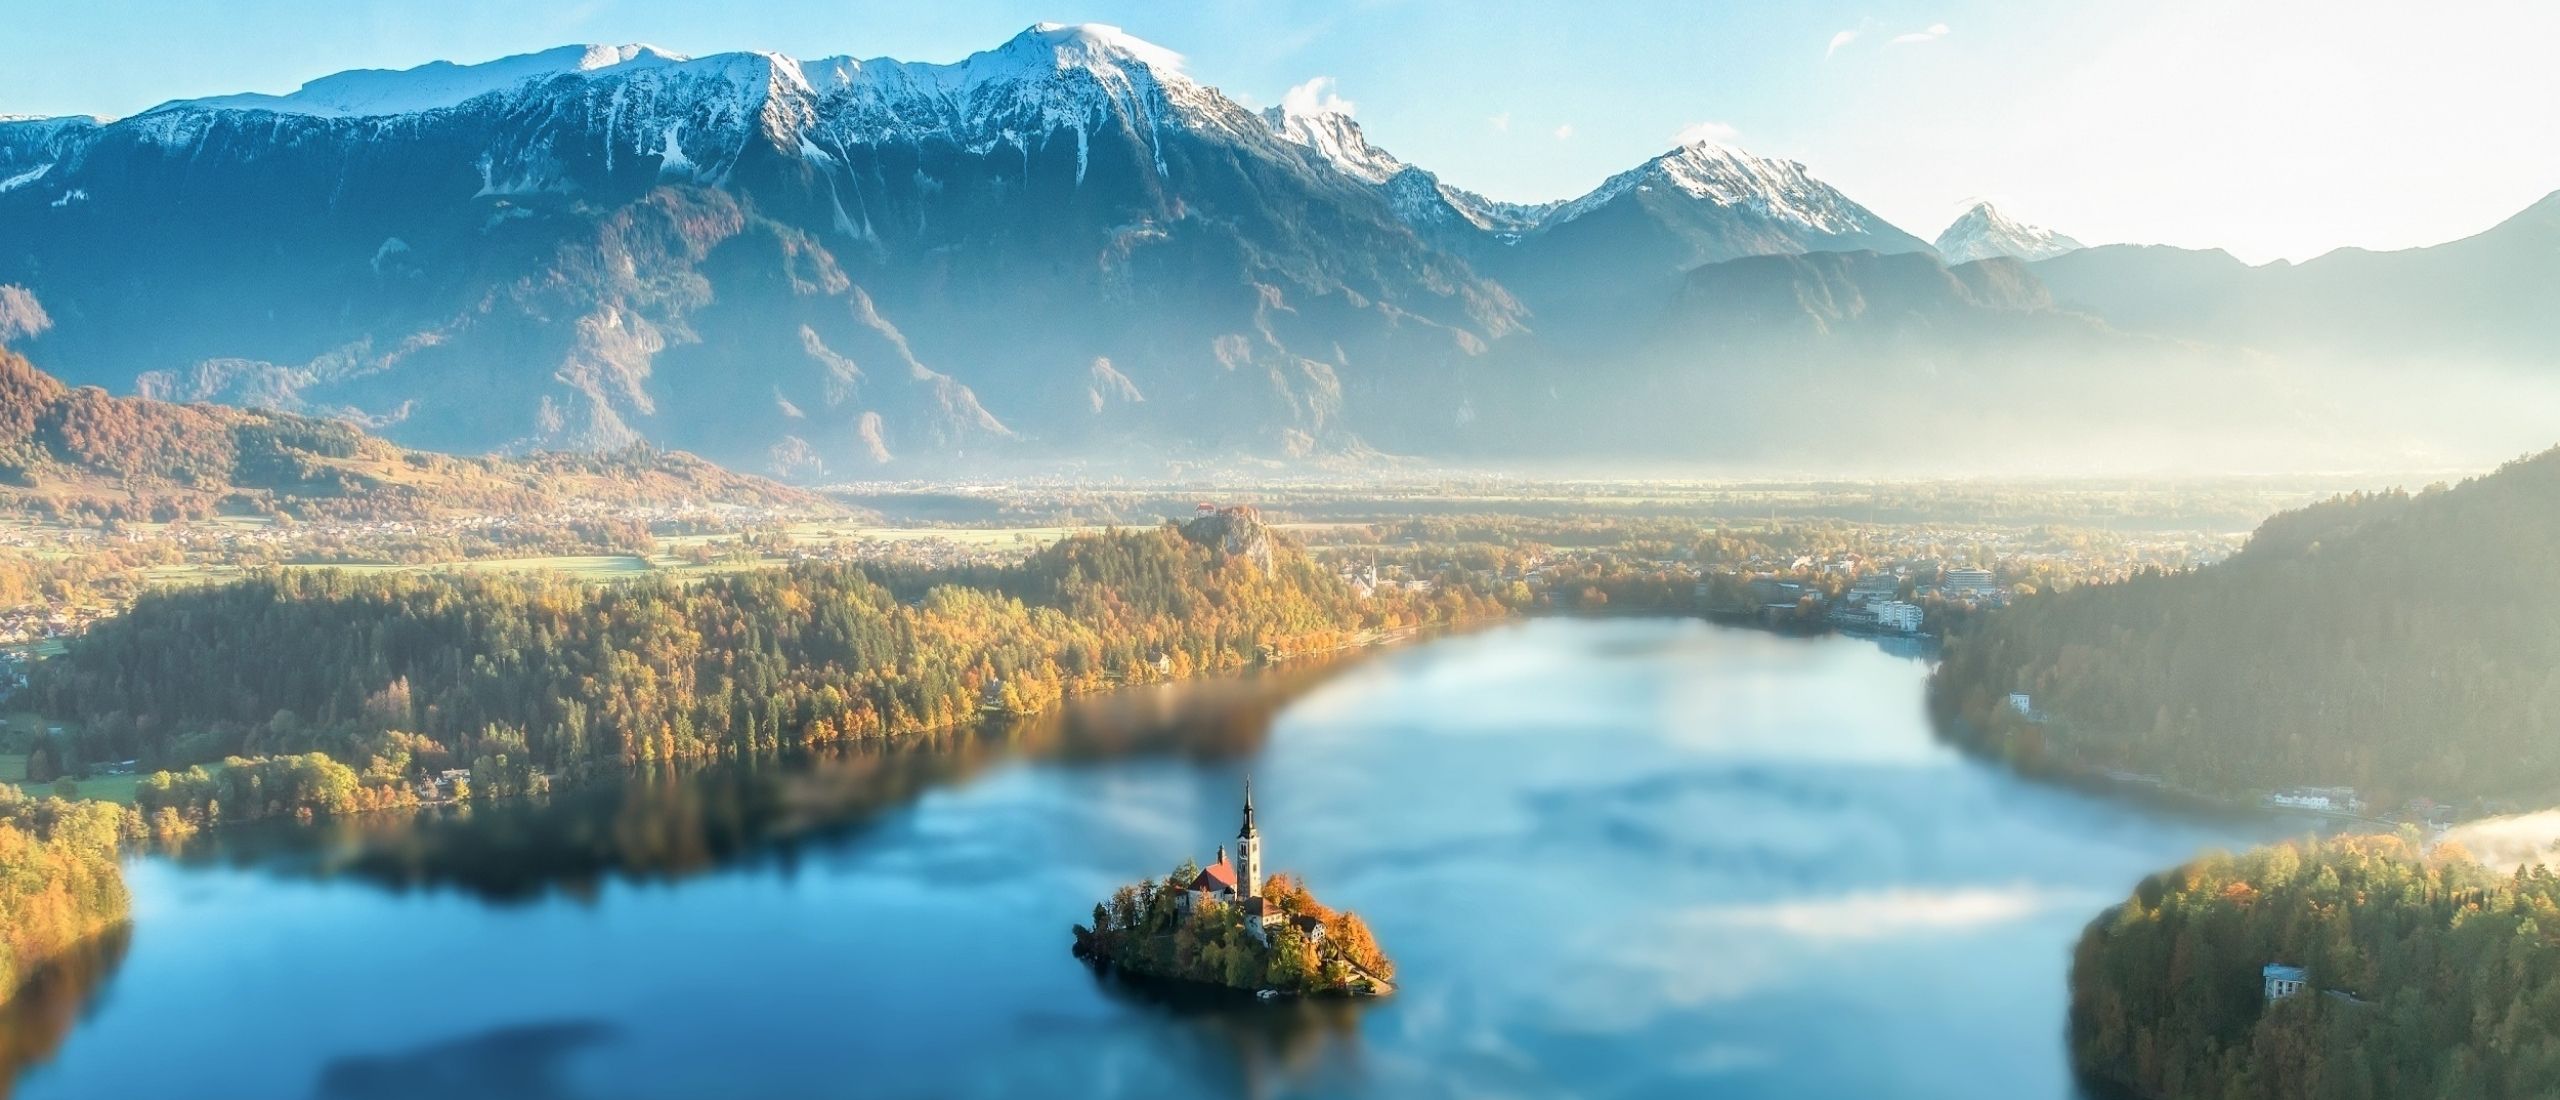 Top-10-places-to-visit-in-slovenia-Bled